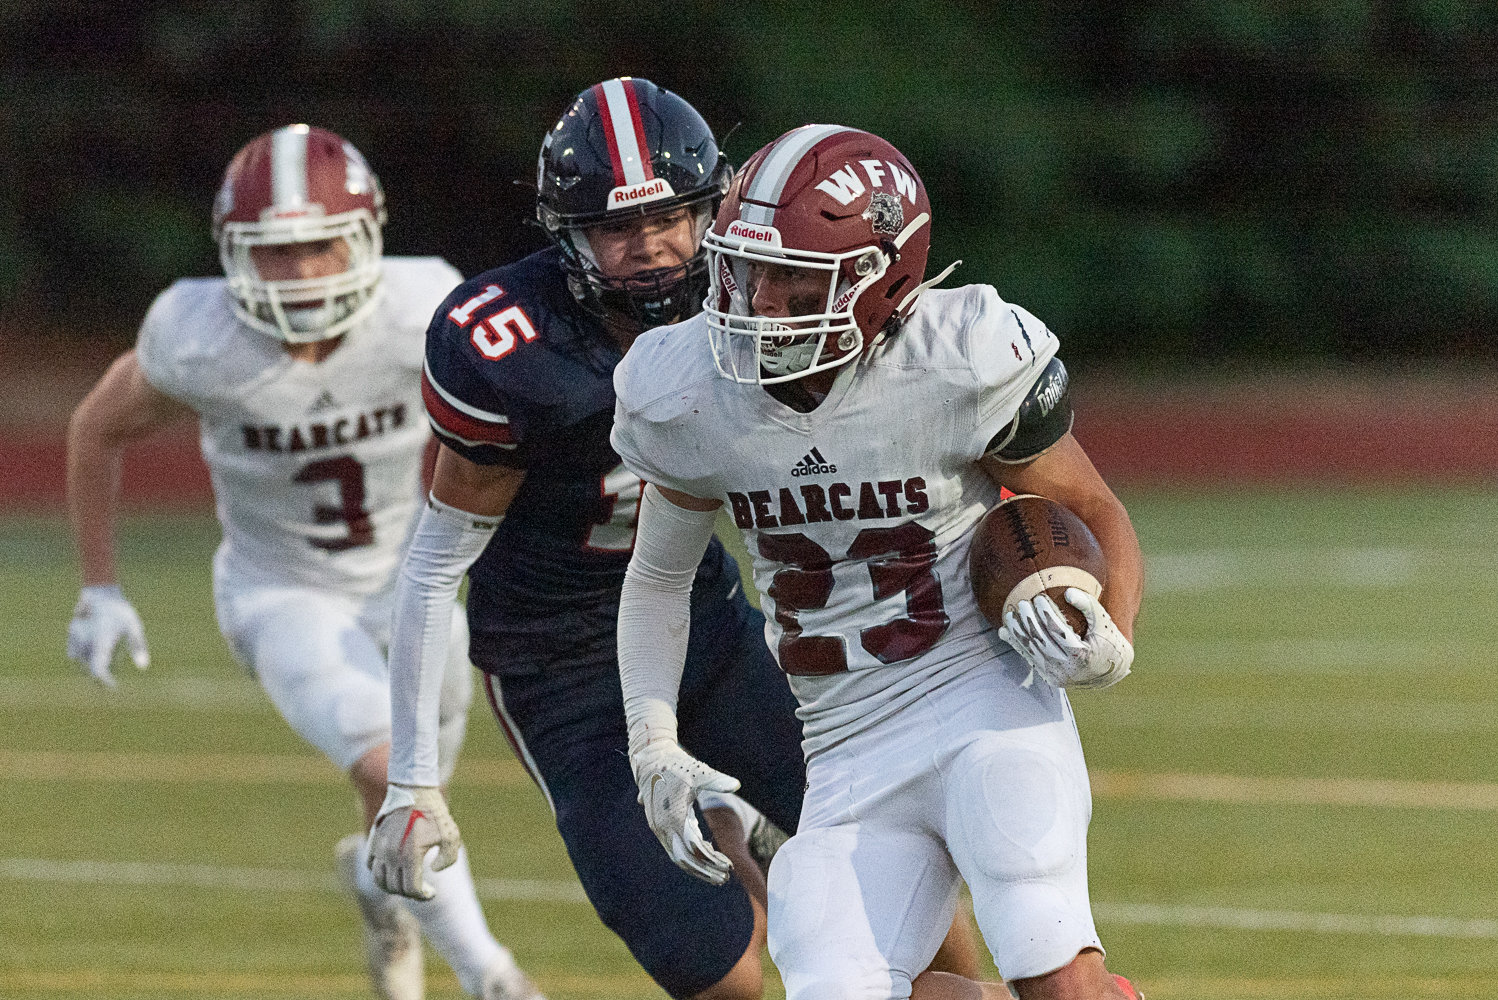 W.F. West receiver Evan Stajduhar takes the ball upfield on a screen play in the first quarter of the Bearcats' 35-0 win over Black Hills on Sept. 23 at Tumwater District Stadium.